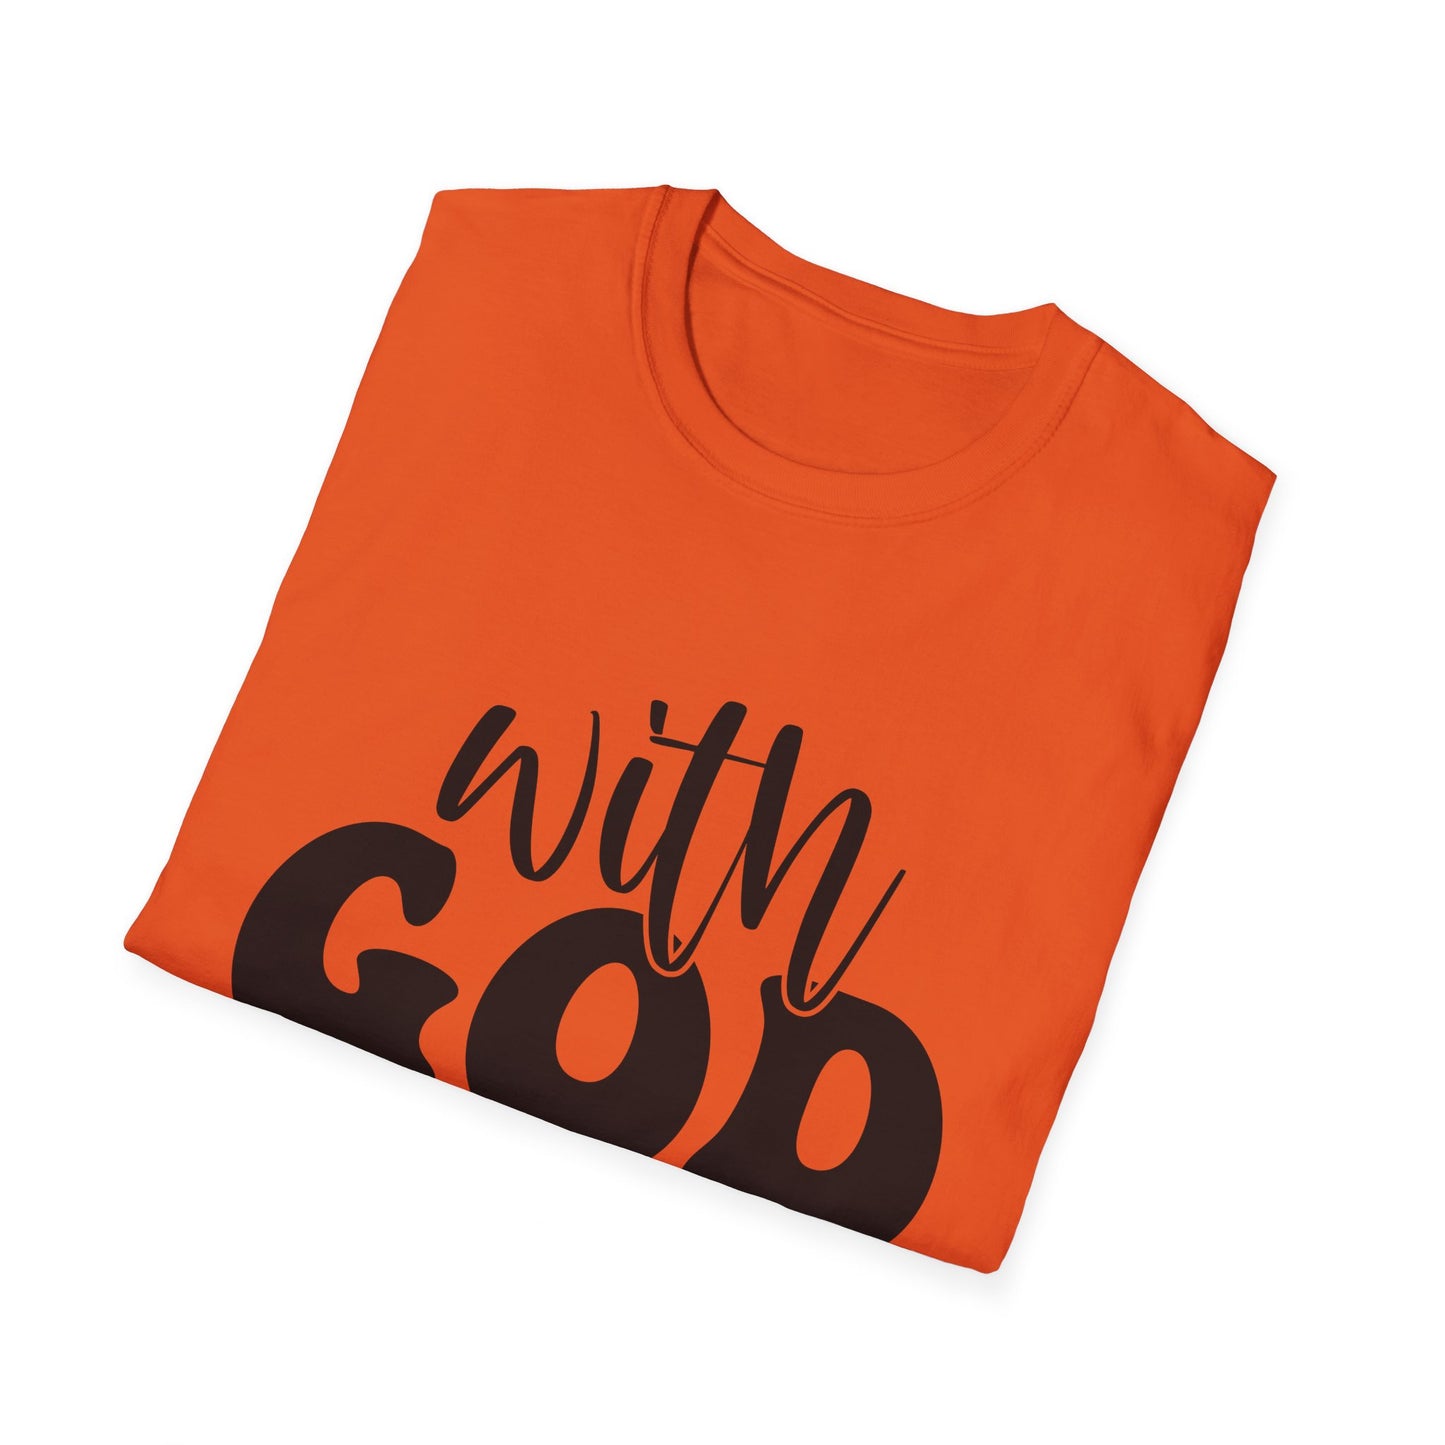 With God All Thing Are Possible Mattew 19:26 Triple Viking T-Shirt